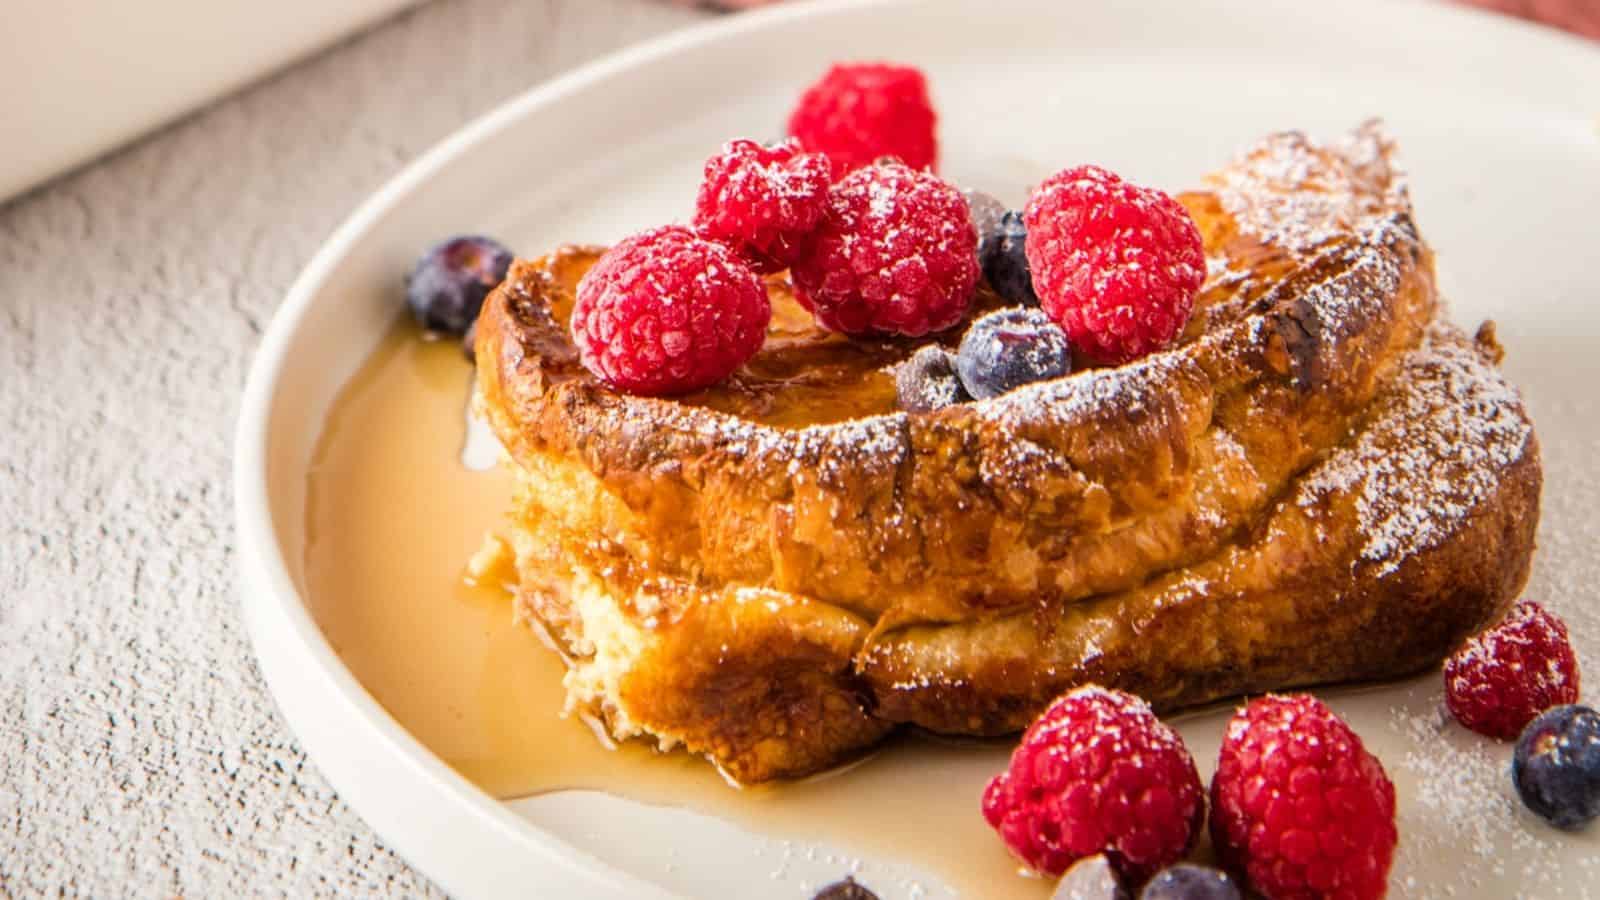 A close up image of croissant French toast topped with blueberries and raspberries.